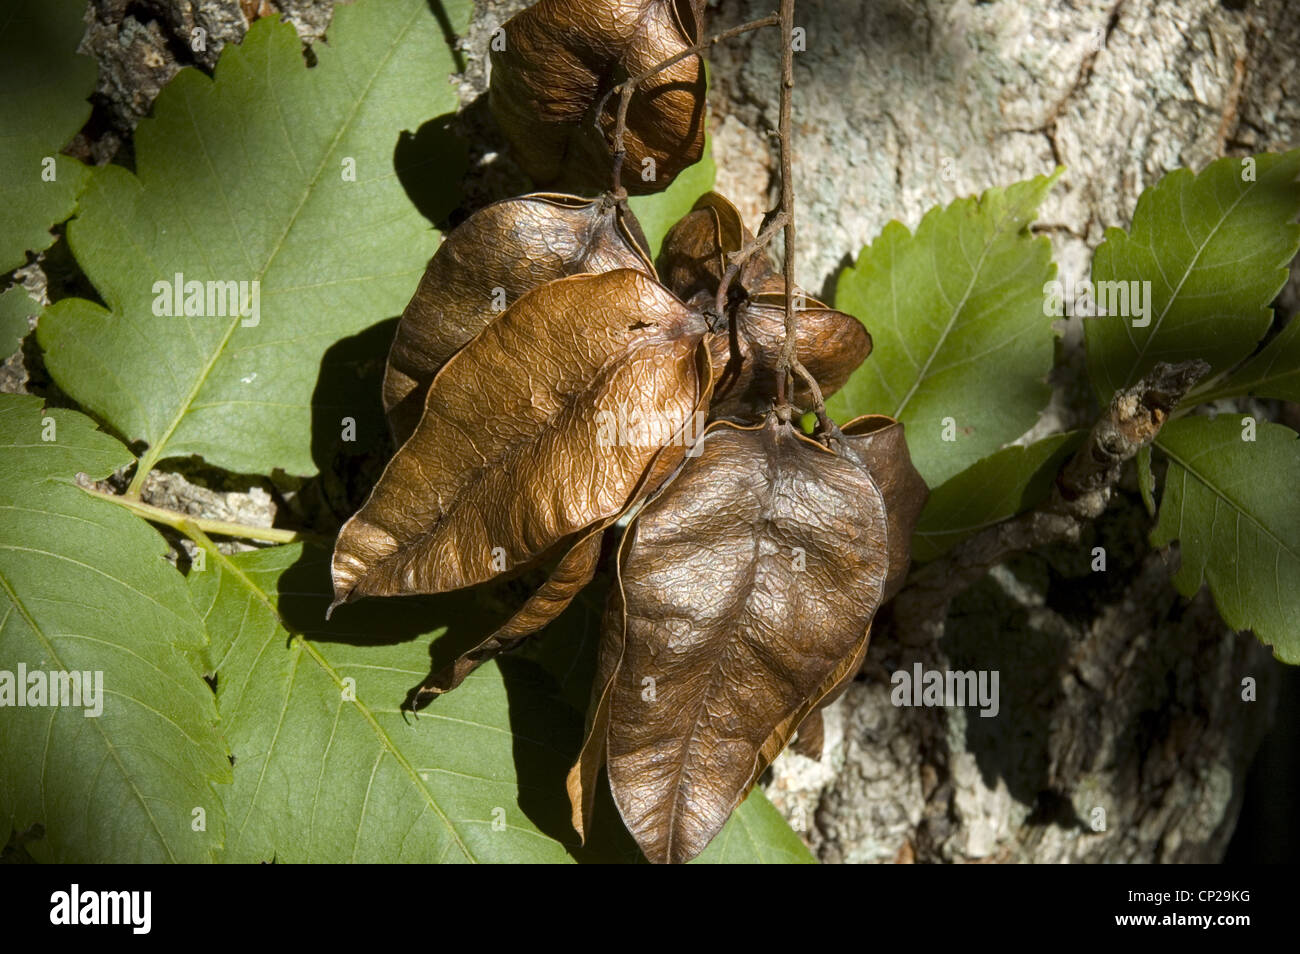 CLOSE-UP OF SEED PODS FROM GOLDEN RAIN TREE (KOELREUTERIA PANICULATA) / NEW JERSEY Stock Photo